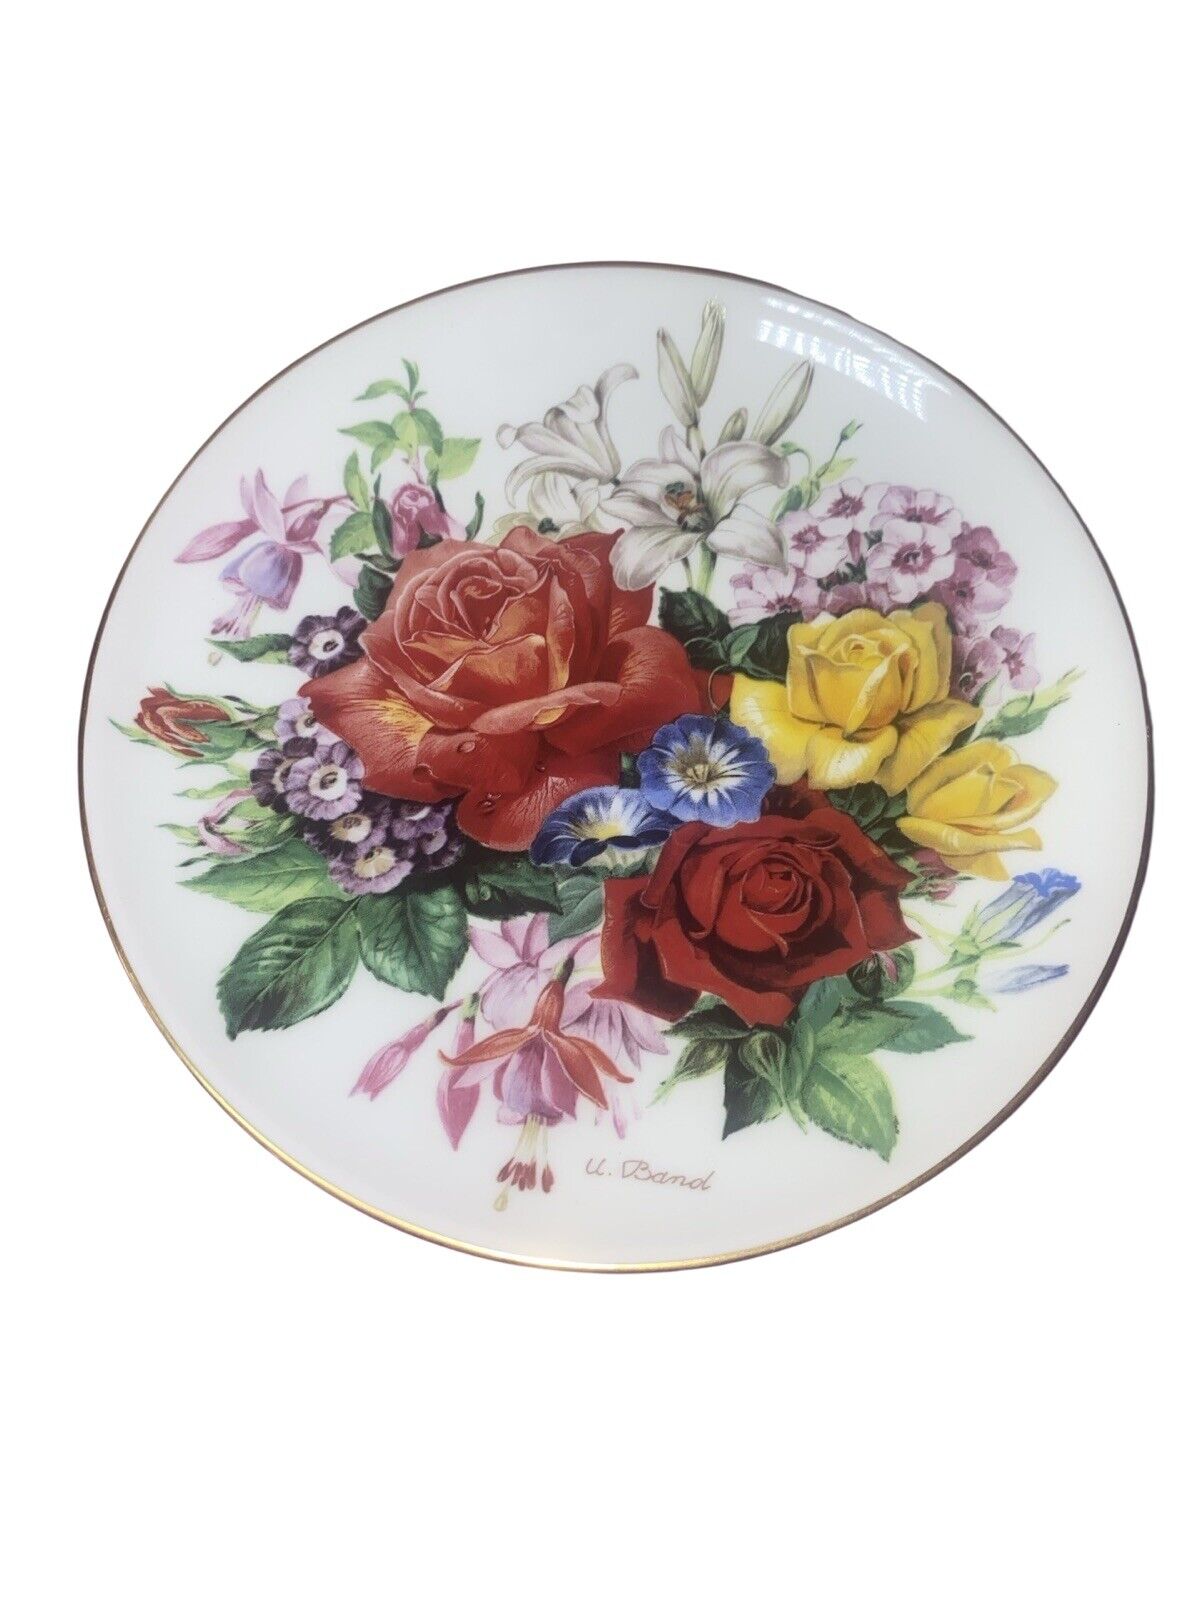 Hutschenreuther Germany Collection Plate - Sommerpracht - Ursula Band